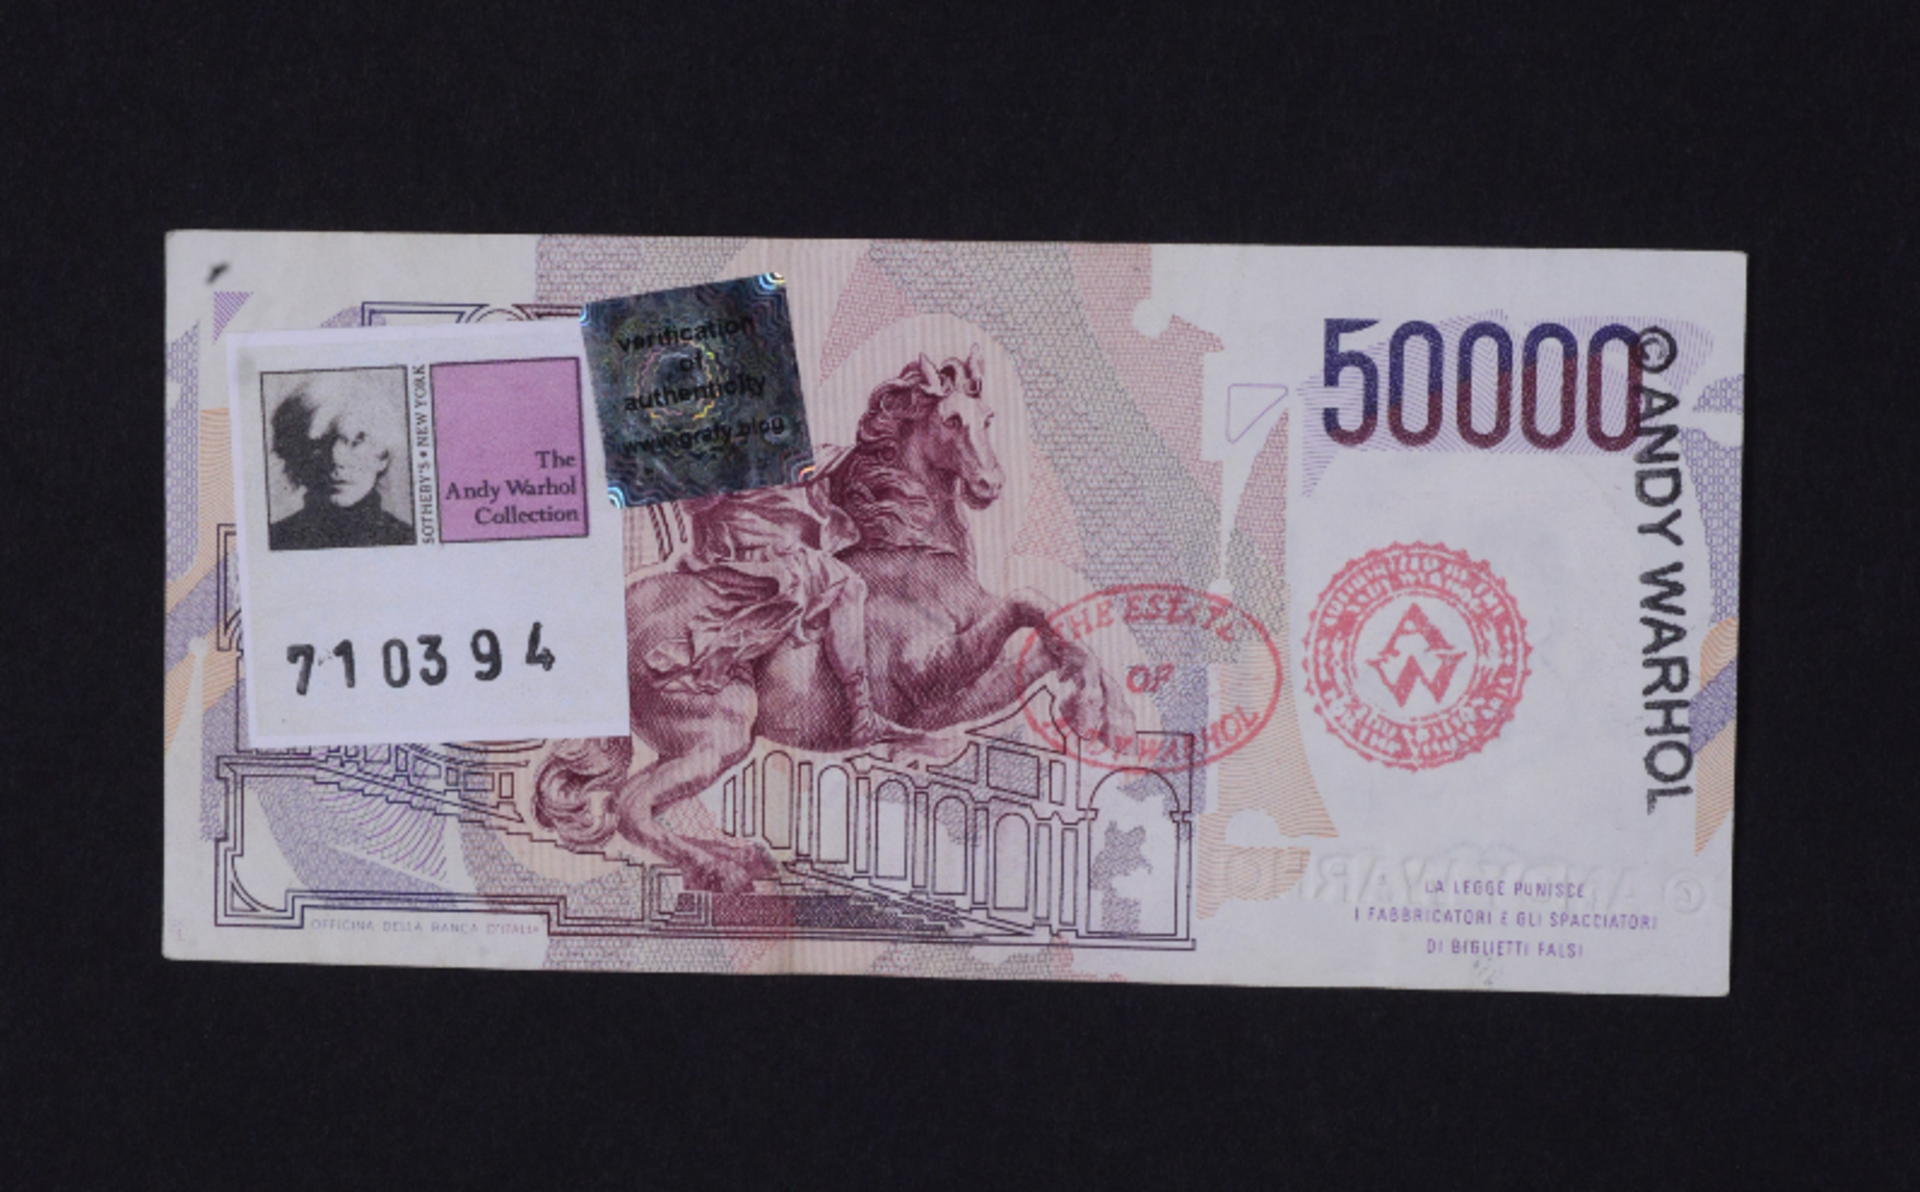 50,000 Lire signed by Andy Warhol, with author's certificate - Image 2 of 3